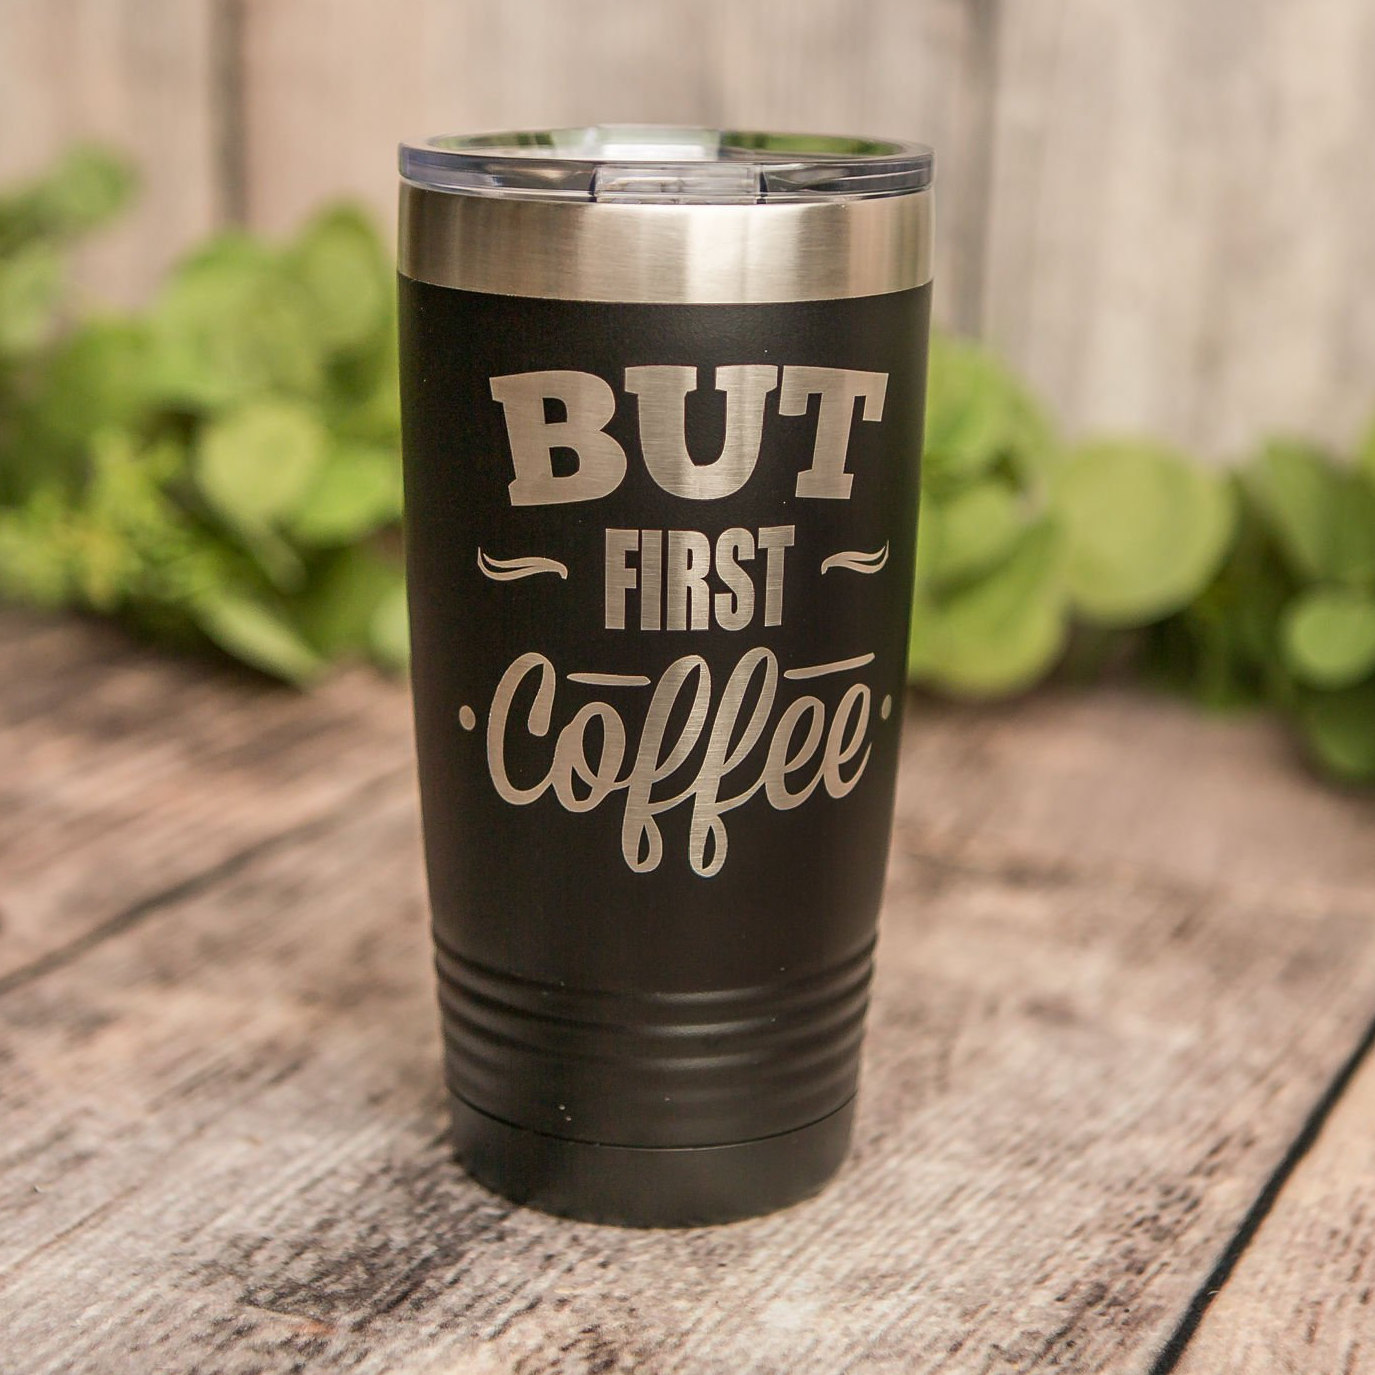 https://3cetching.com/wp-content/uploads/2020/09/but-first-coffee-engraved-stainless-steel-tumbler-yeti-style-cup-coffee-lover-gift-5f5fc7fe.jpg